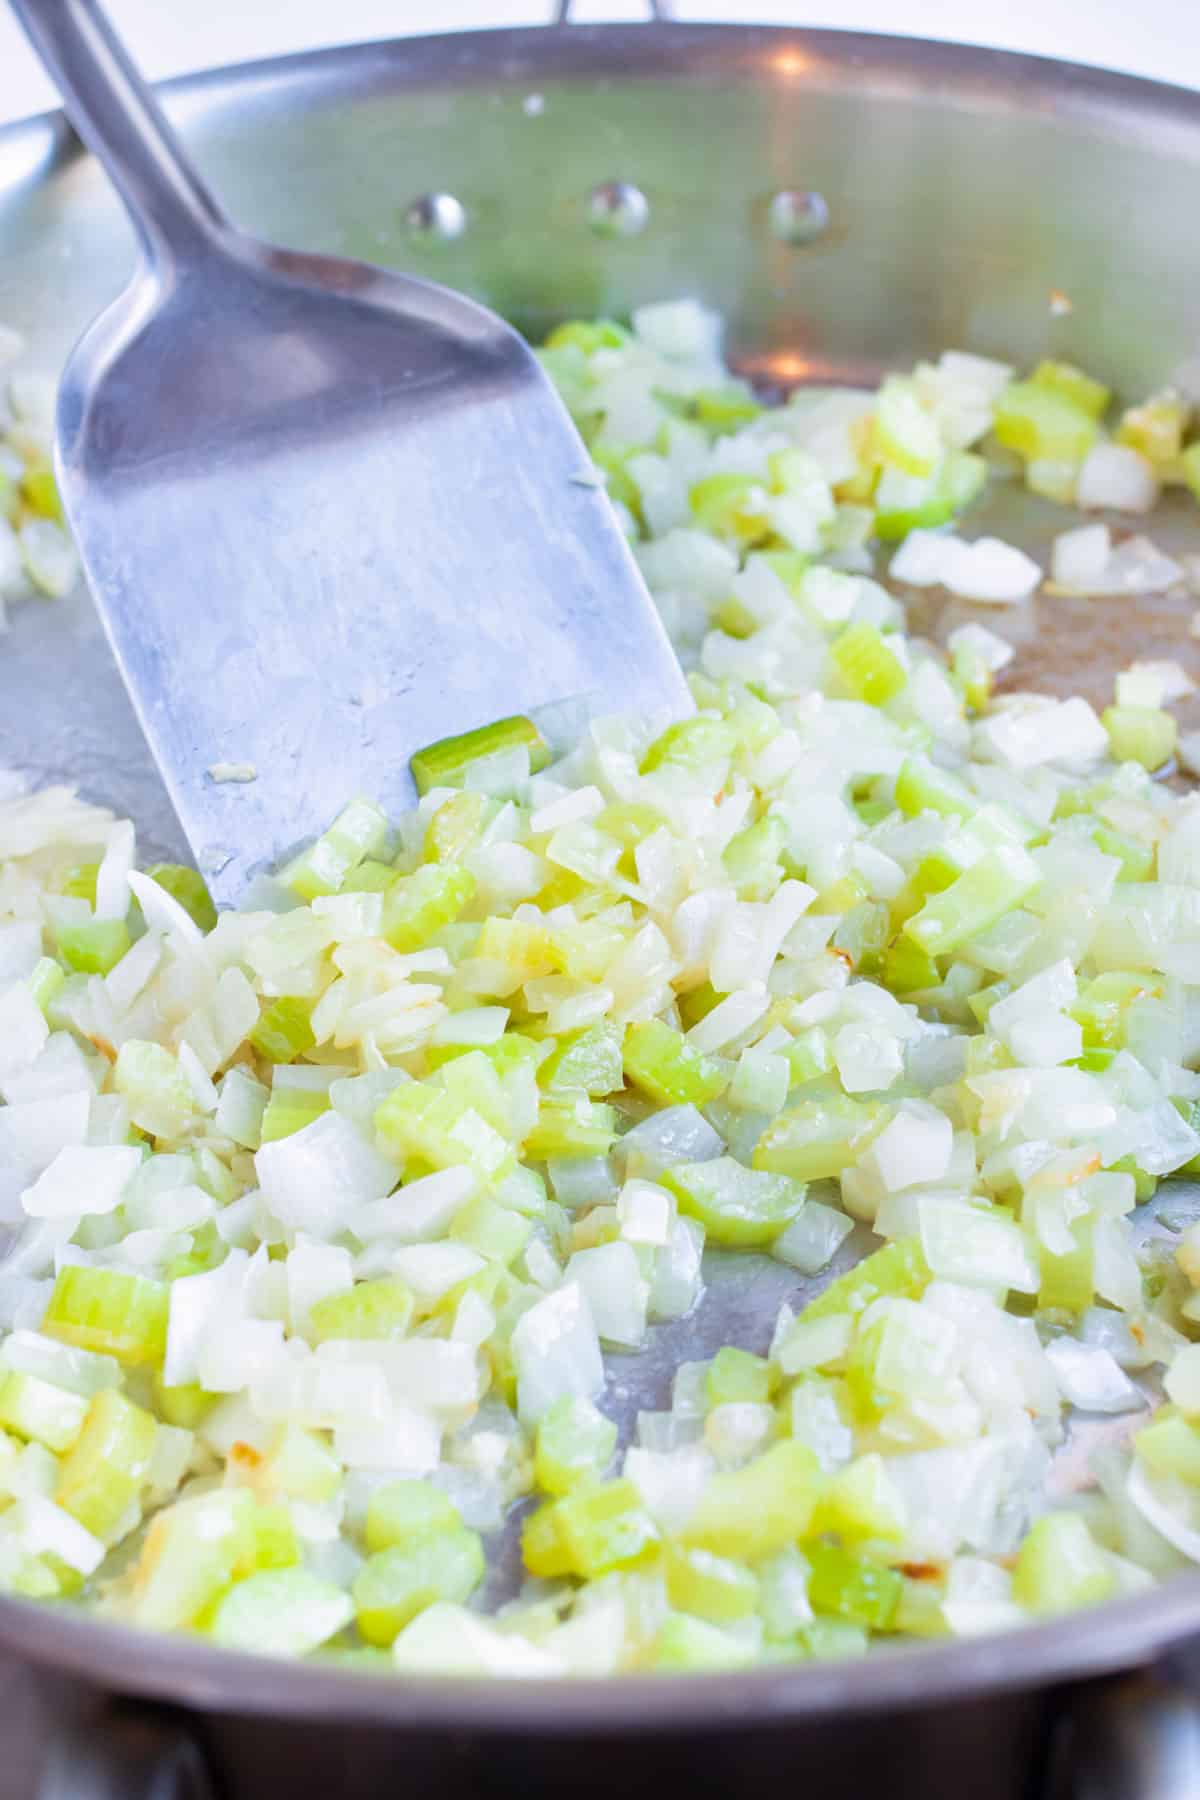 Diced onion and celery is sautéed in a skillet on the stove.